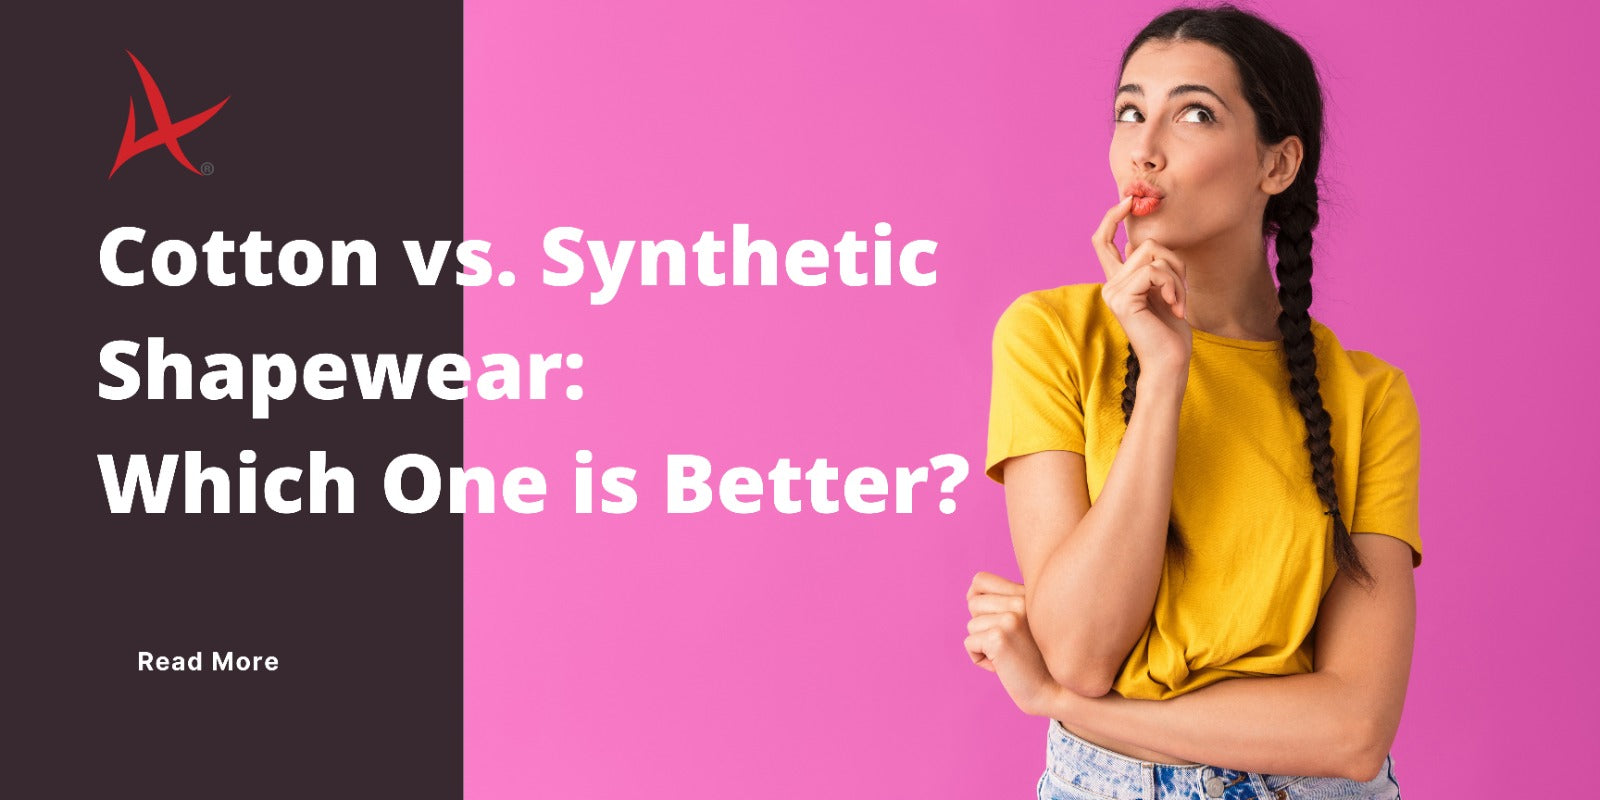 Cotton vs. Synthetic Shapewear: Which One is Better? – Adorna